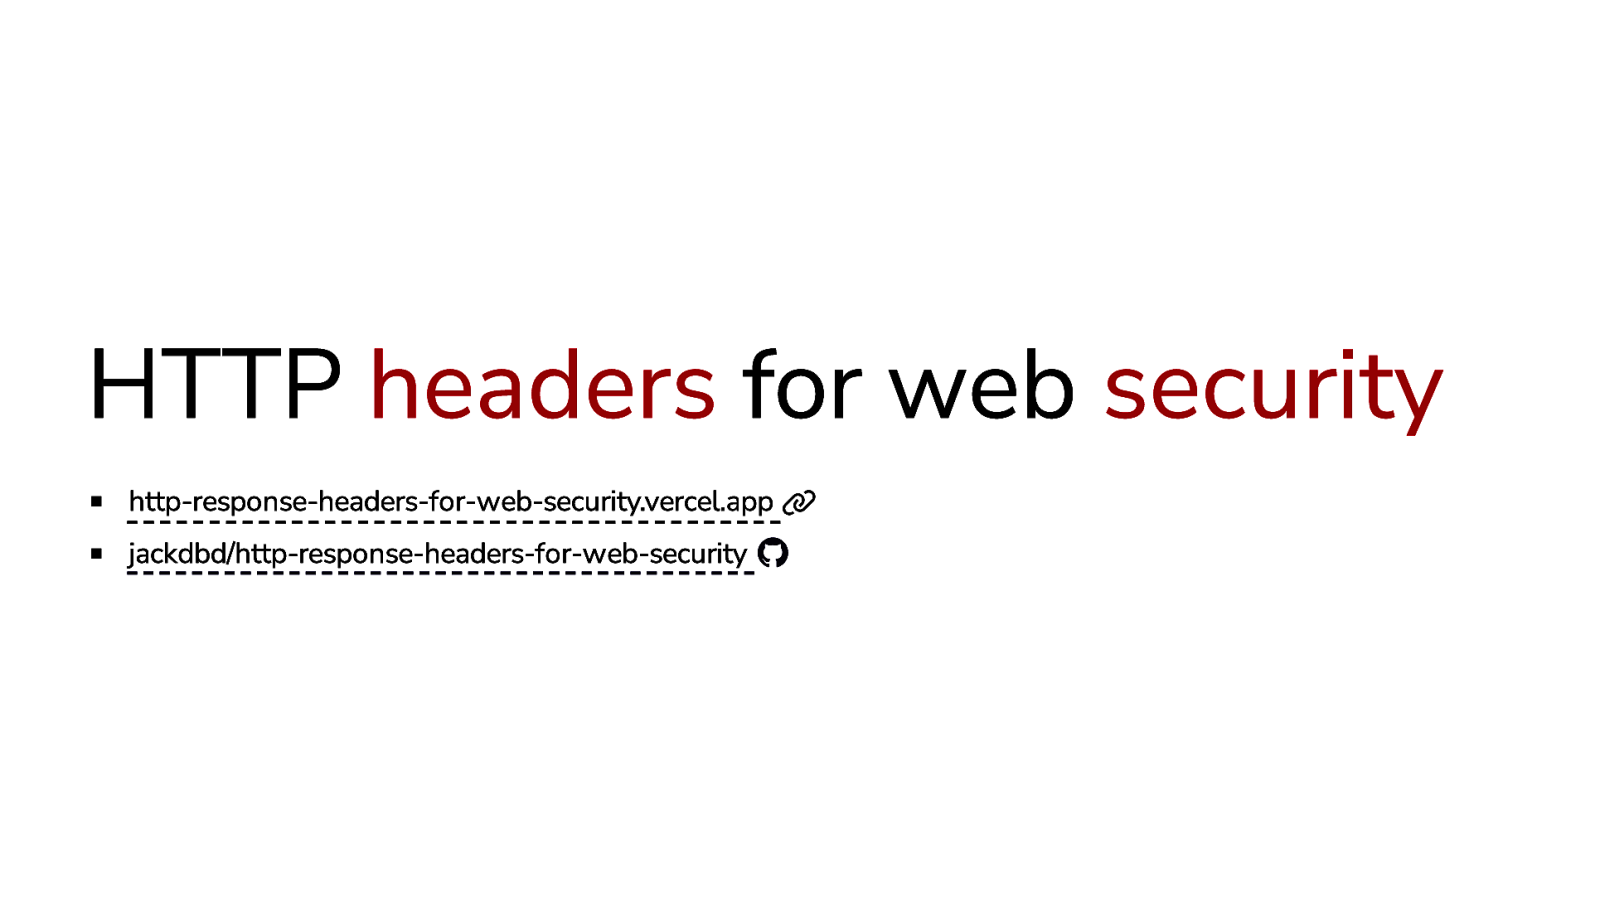 HTTP headers for web security